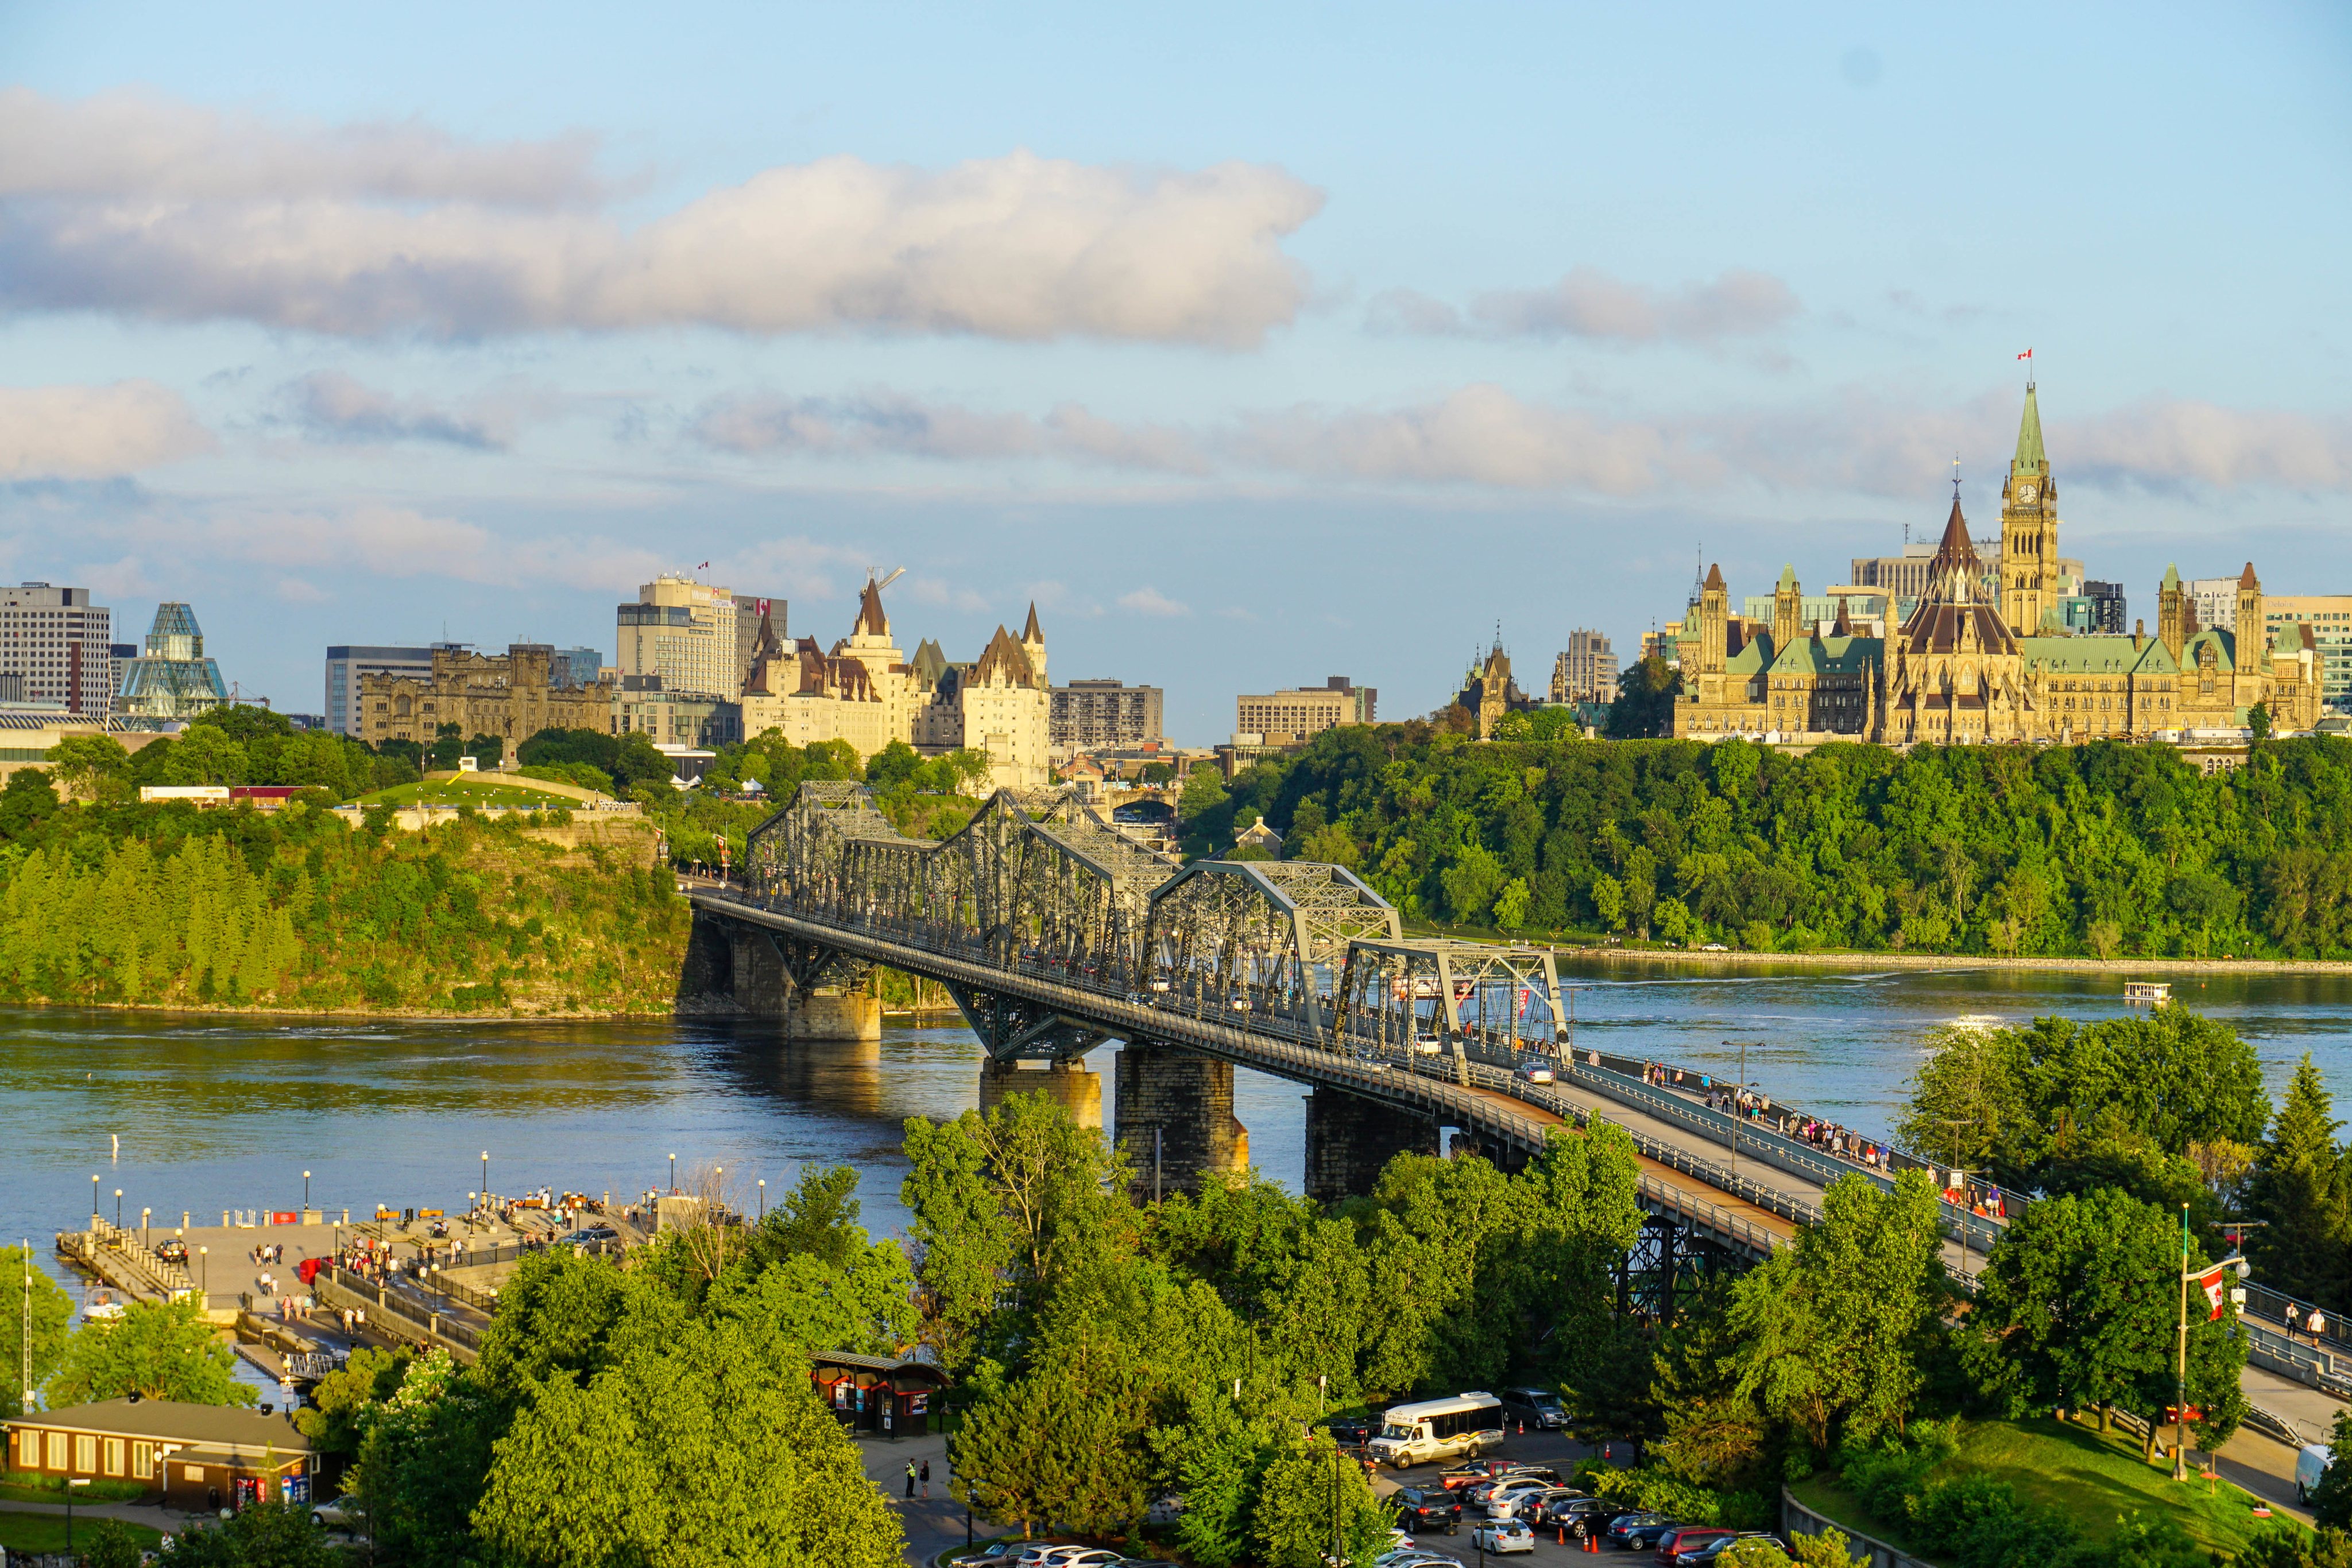 Views of Ottawa, Ontario and the Canadian parliament buildings.